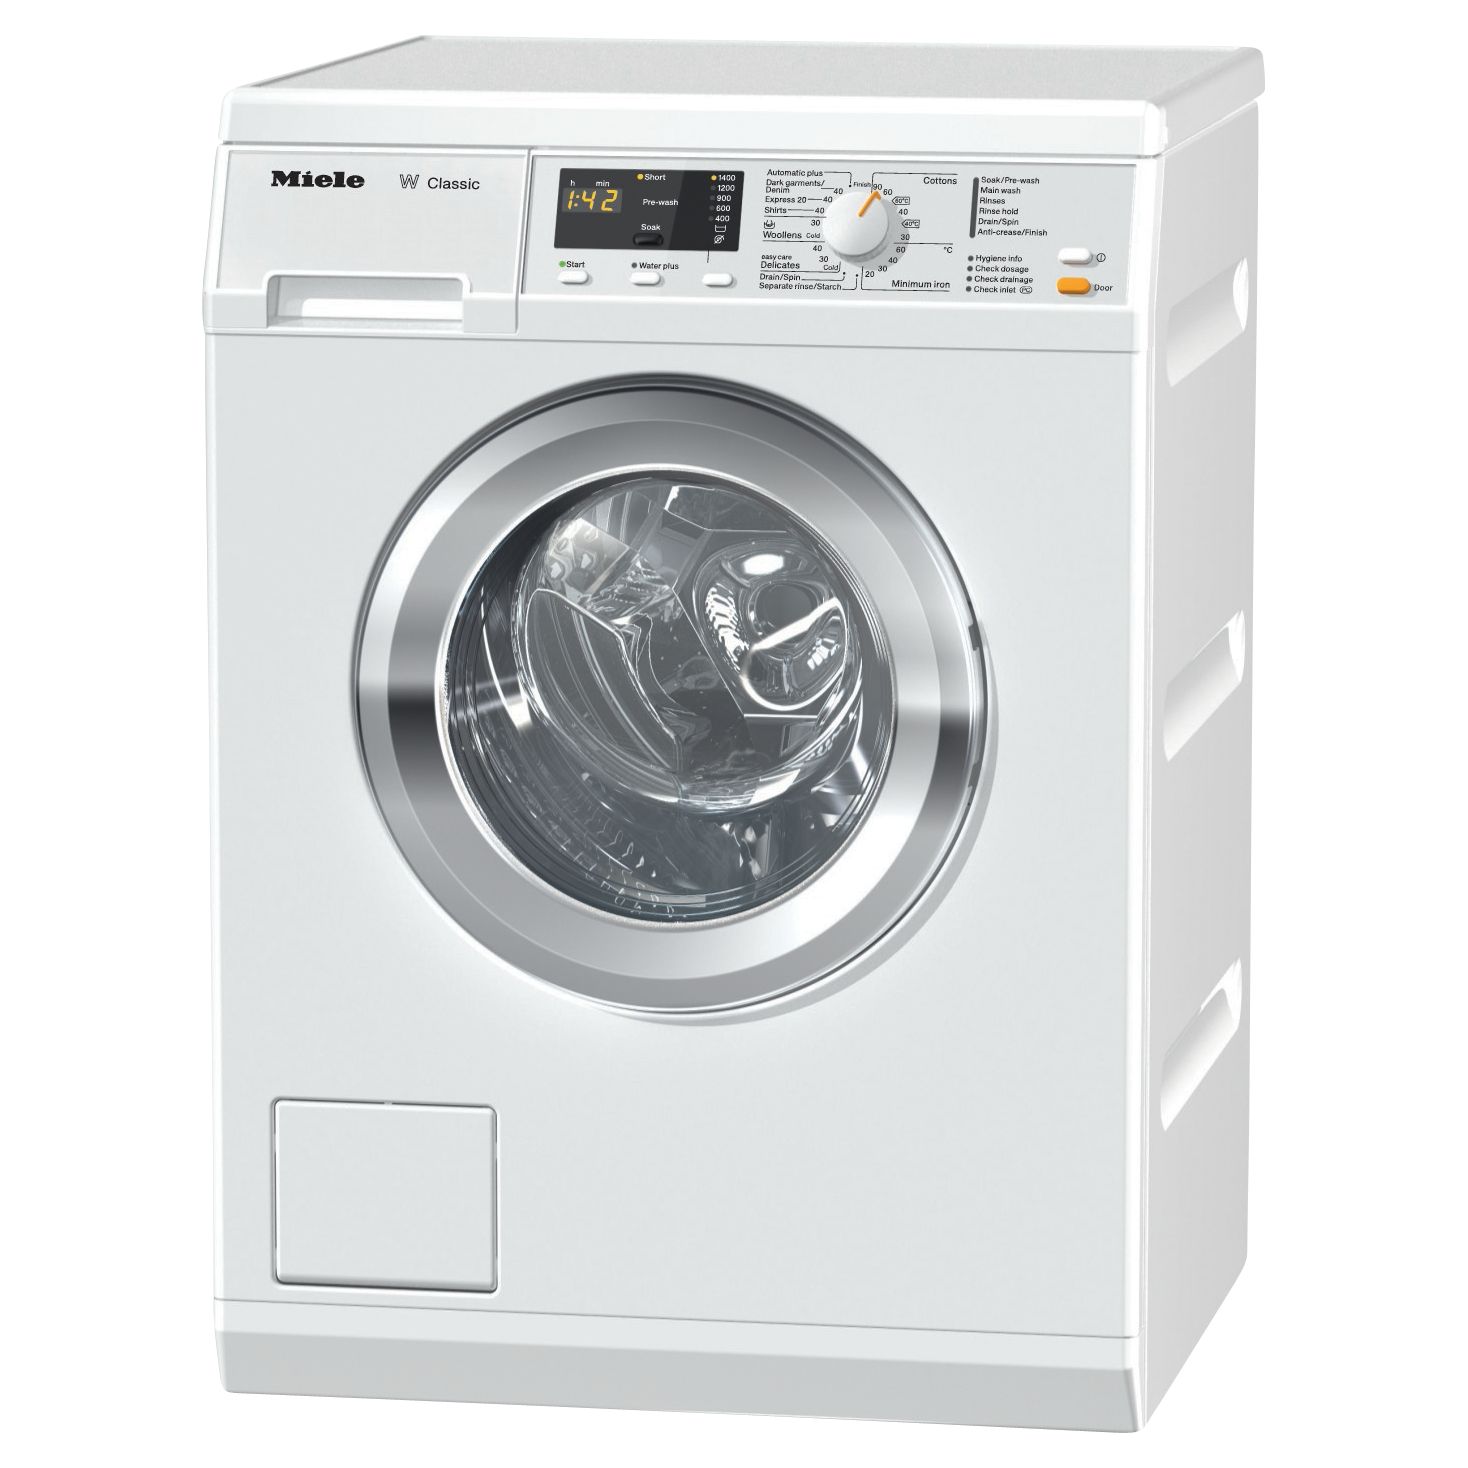 Miele WDA110 Freestanding Washing Machine, 7kg Load, A++ Energy Rating, 1400rpm Spin, White